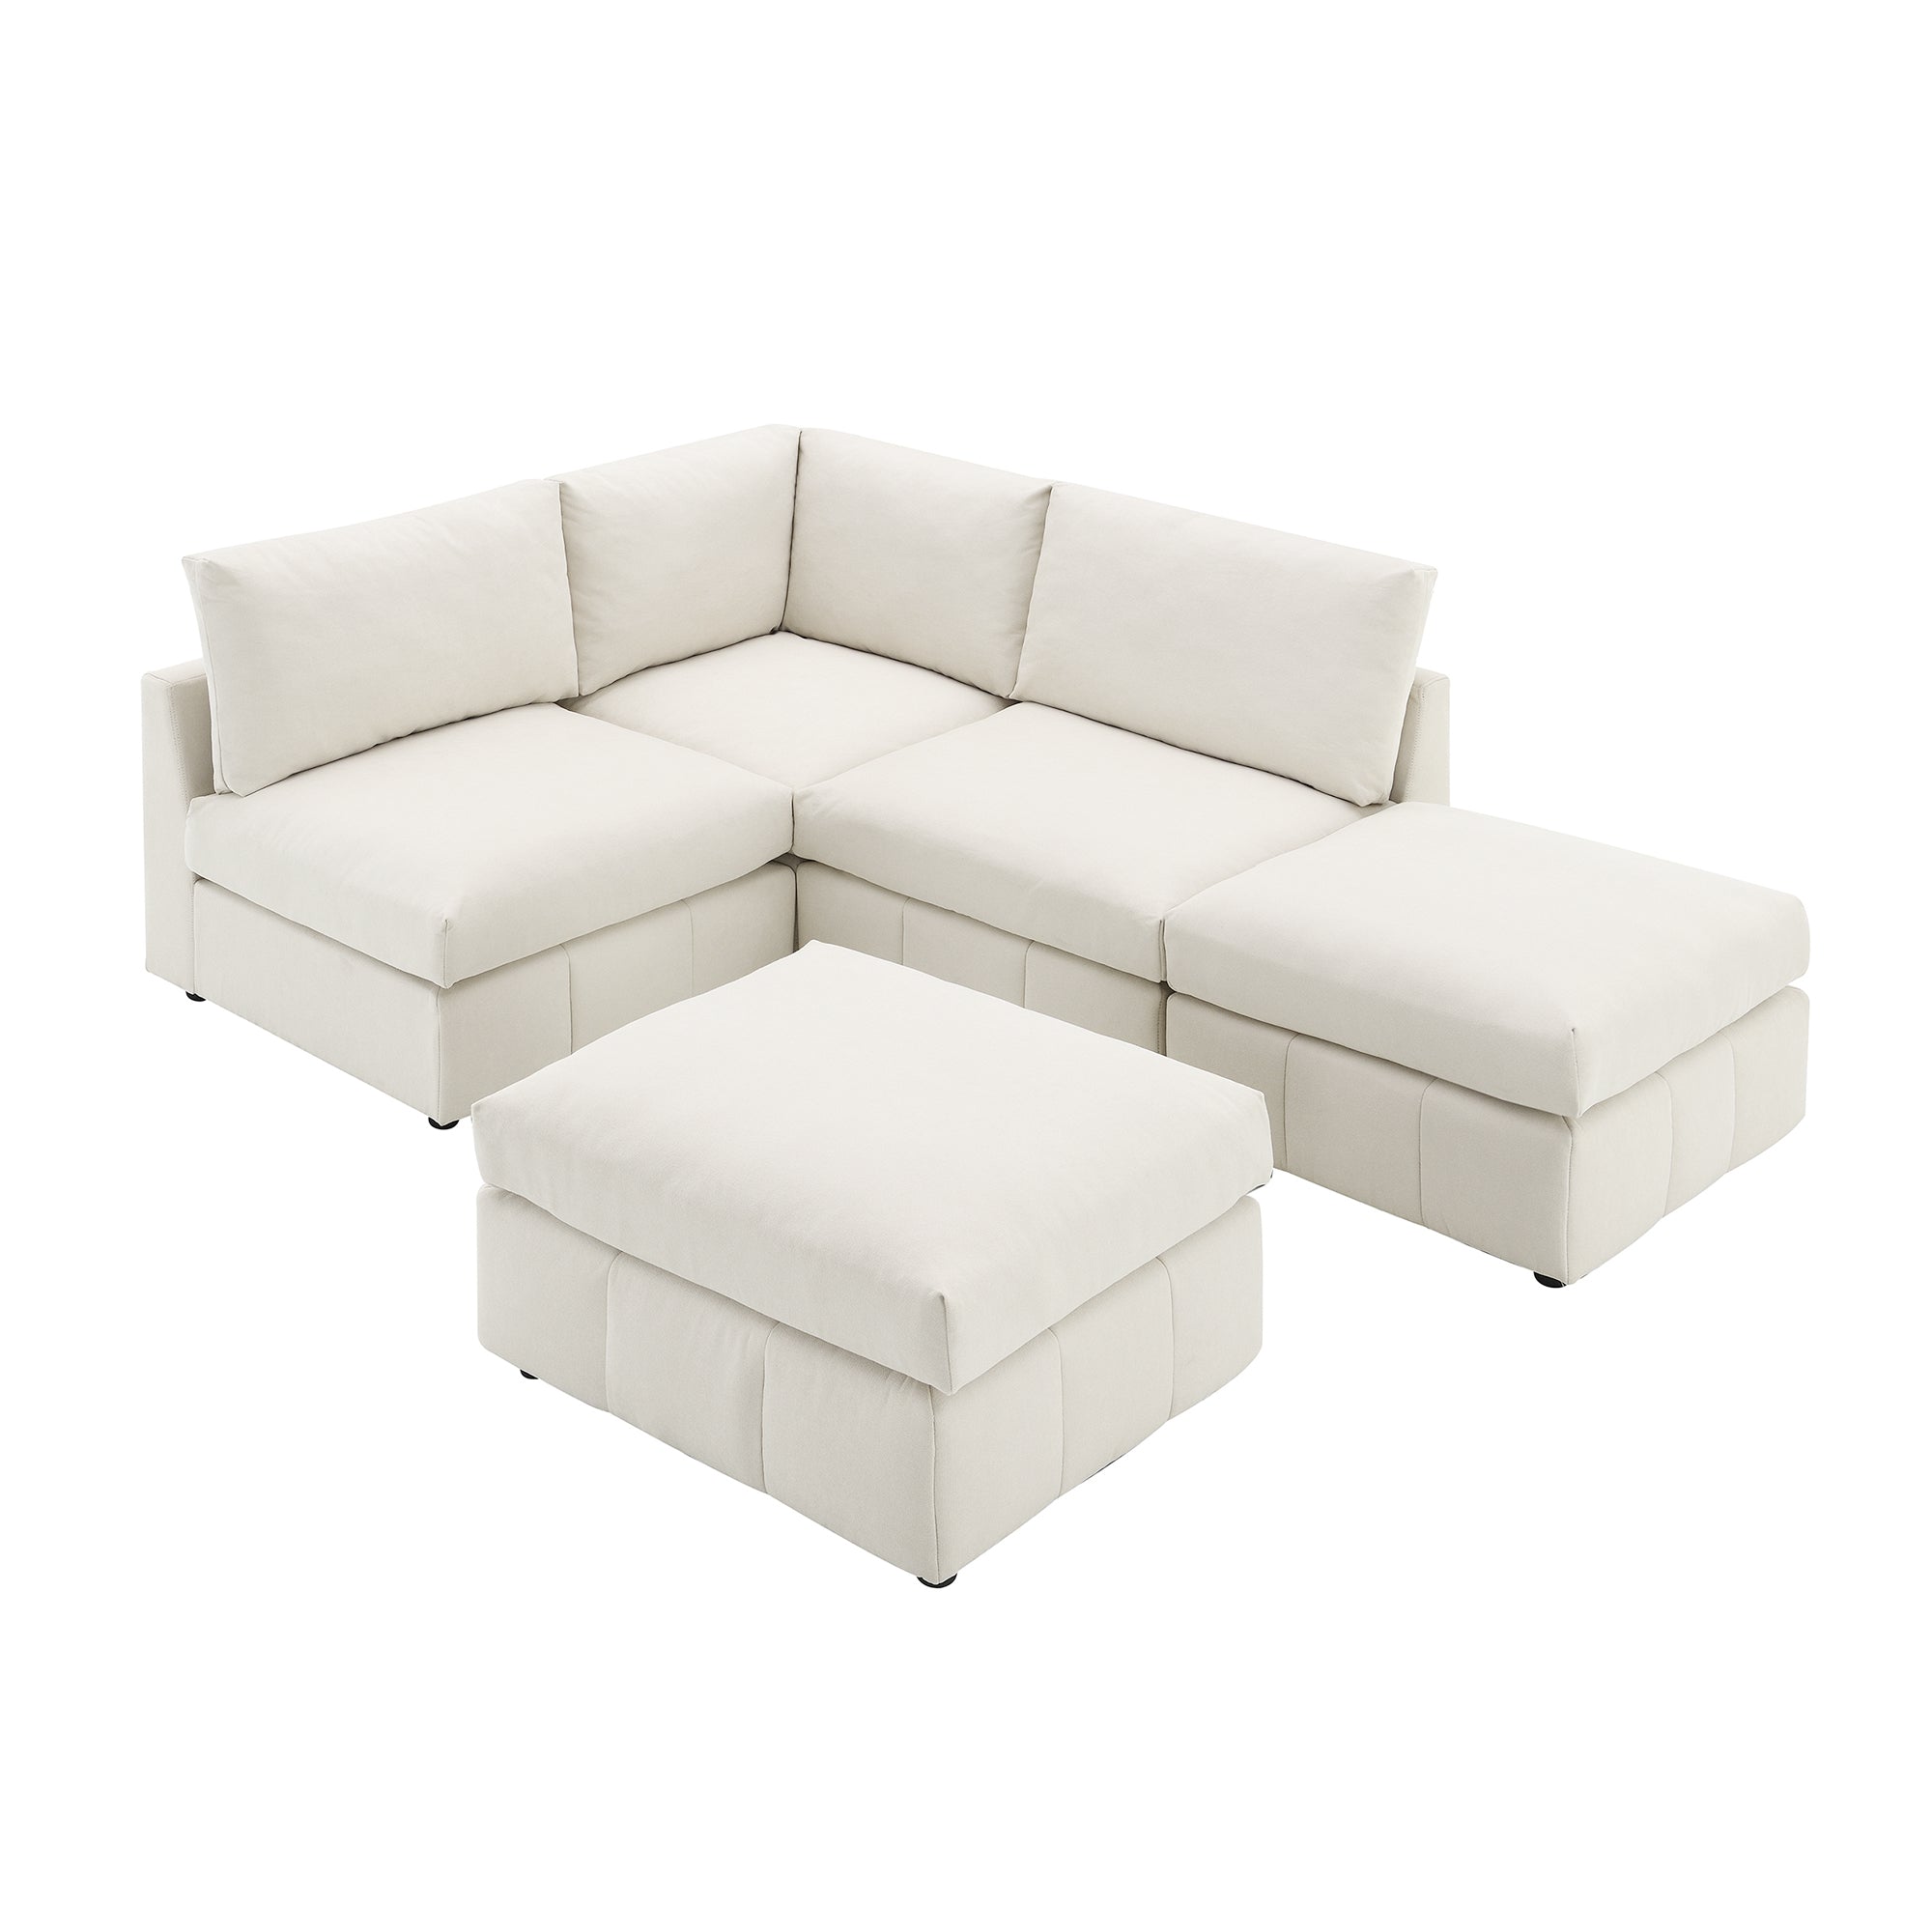 Bellemave® 93" L-Shaped Modern Sectional Sofa with Vertical Stripes with Convertible Ottomans Bellemave